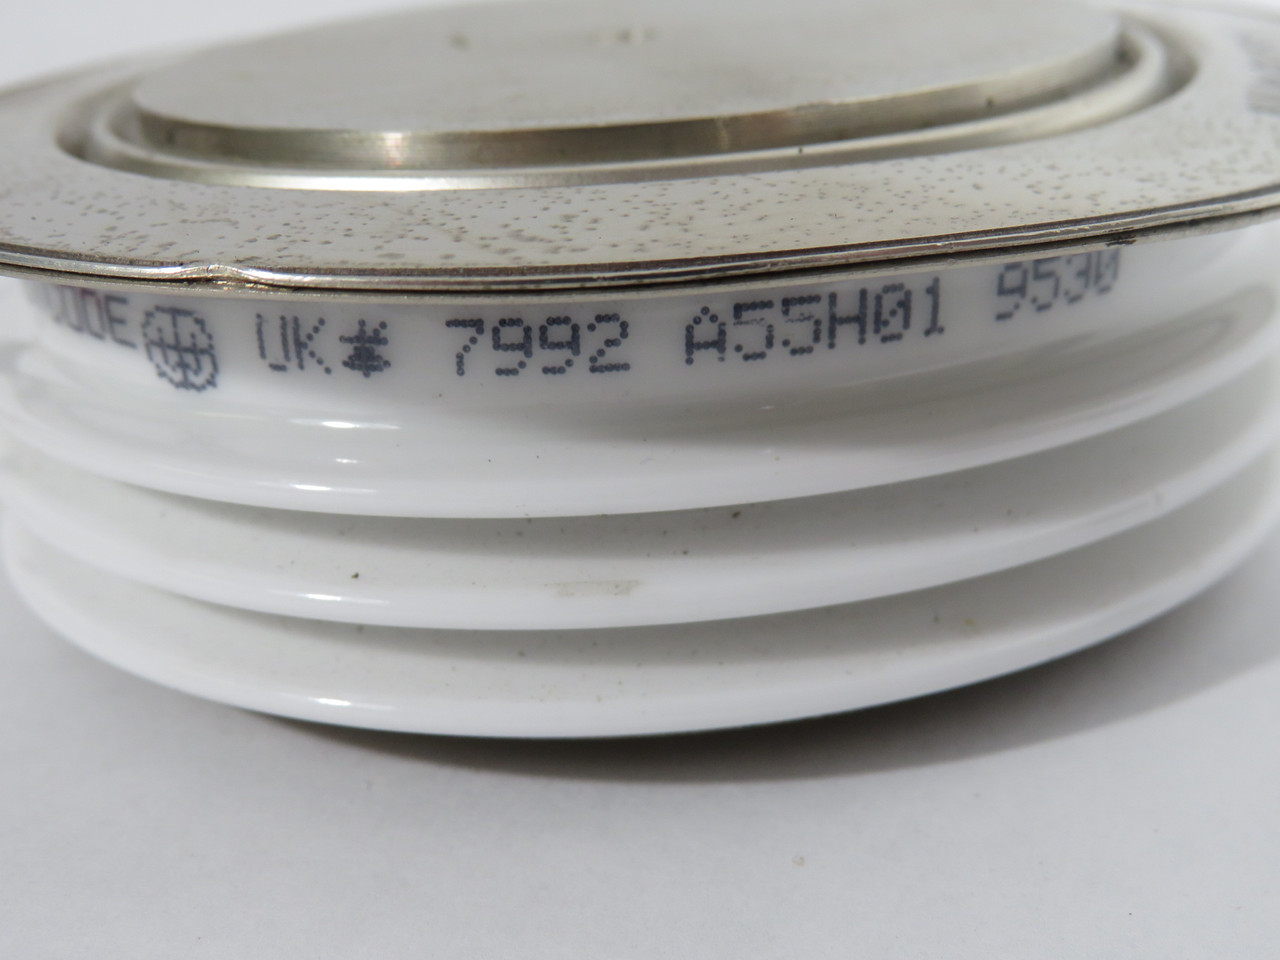 Generic 7992A55H01 Thyristor Module *Cosmetic Dents* USED